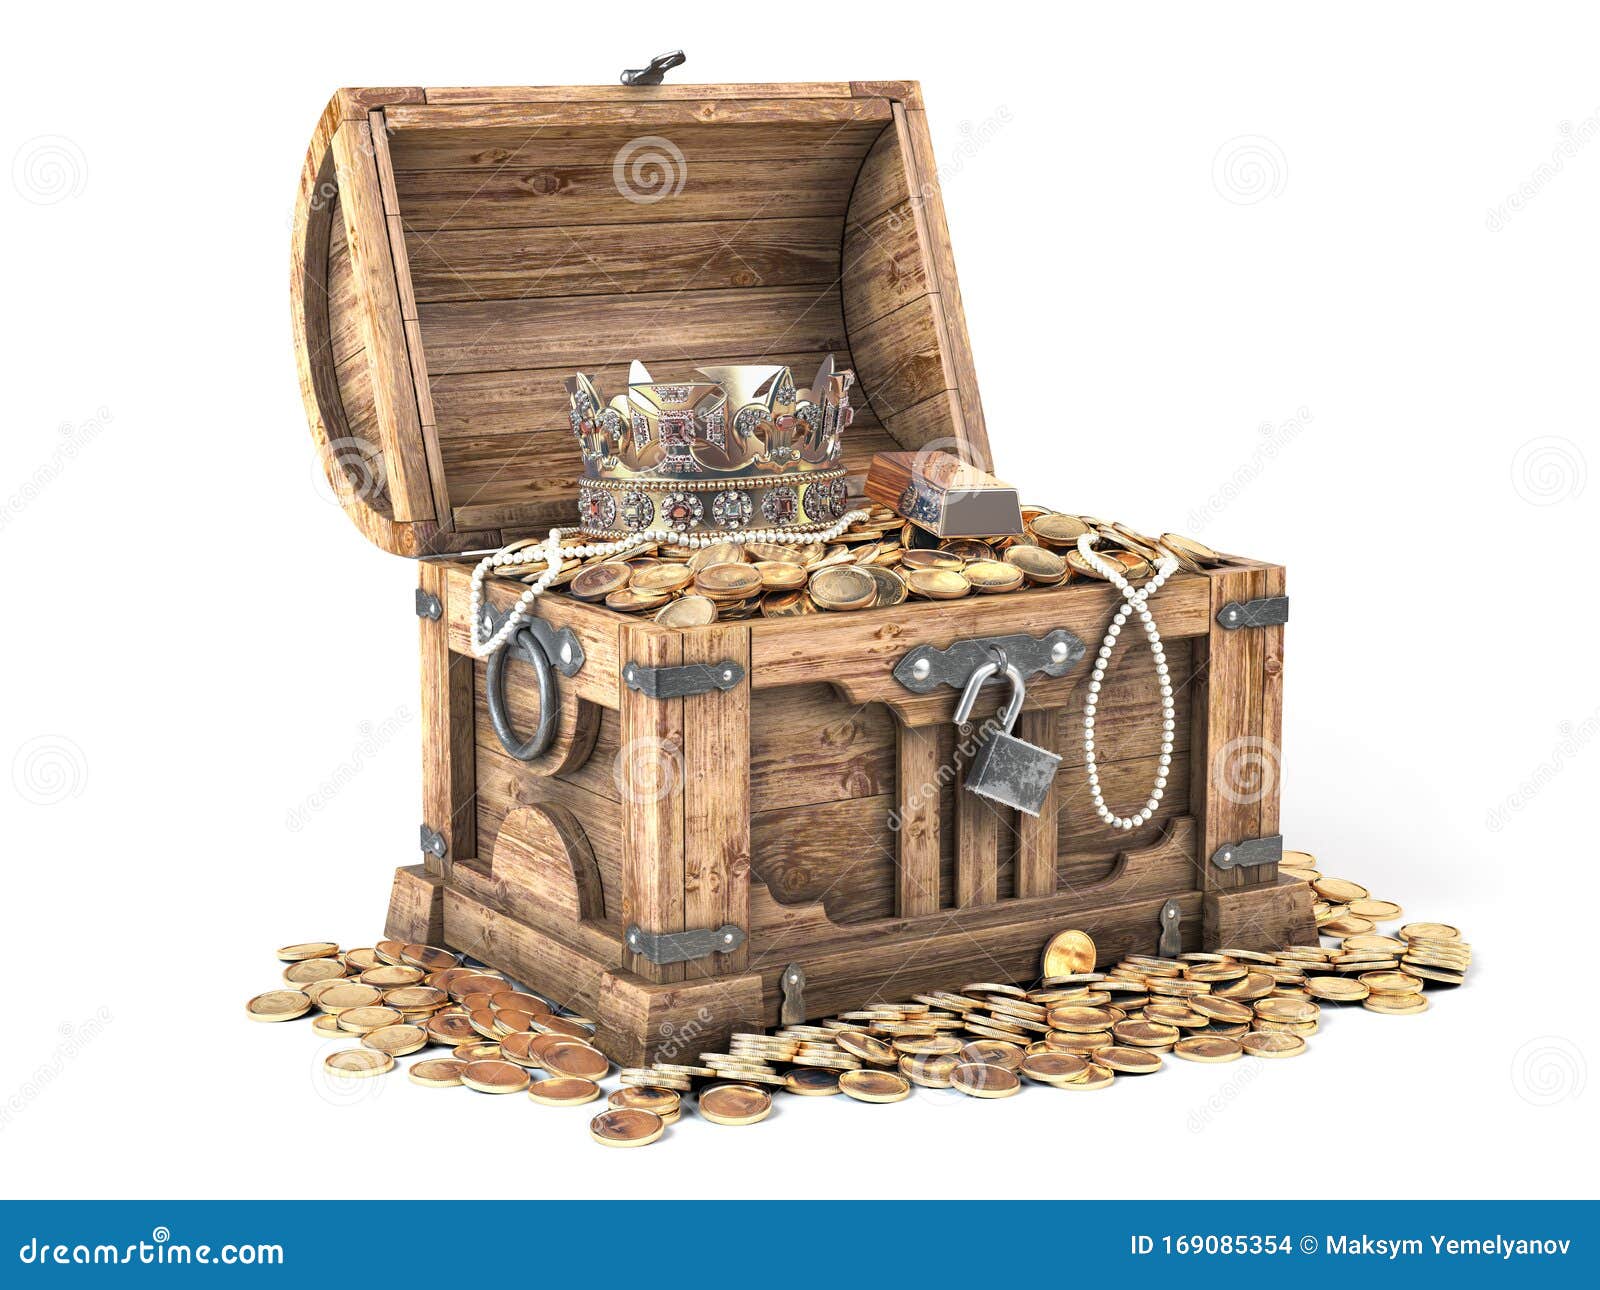 Premium Photo  Chest full of gold coins on a white background. 3d render